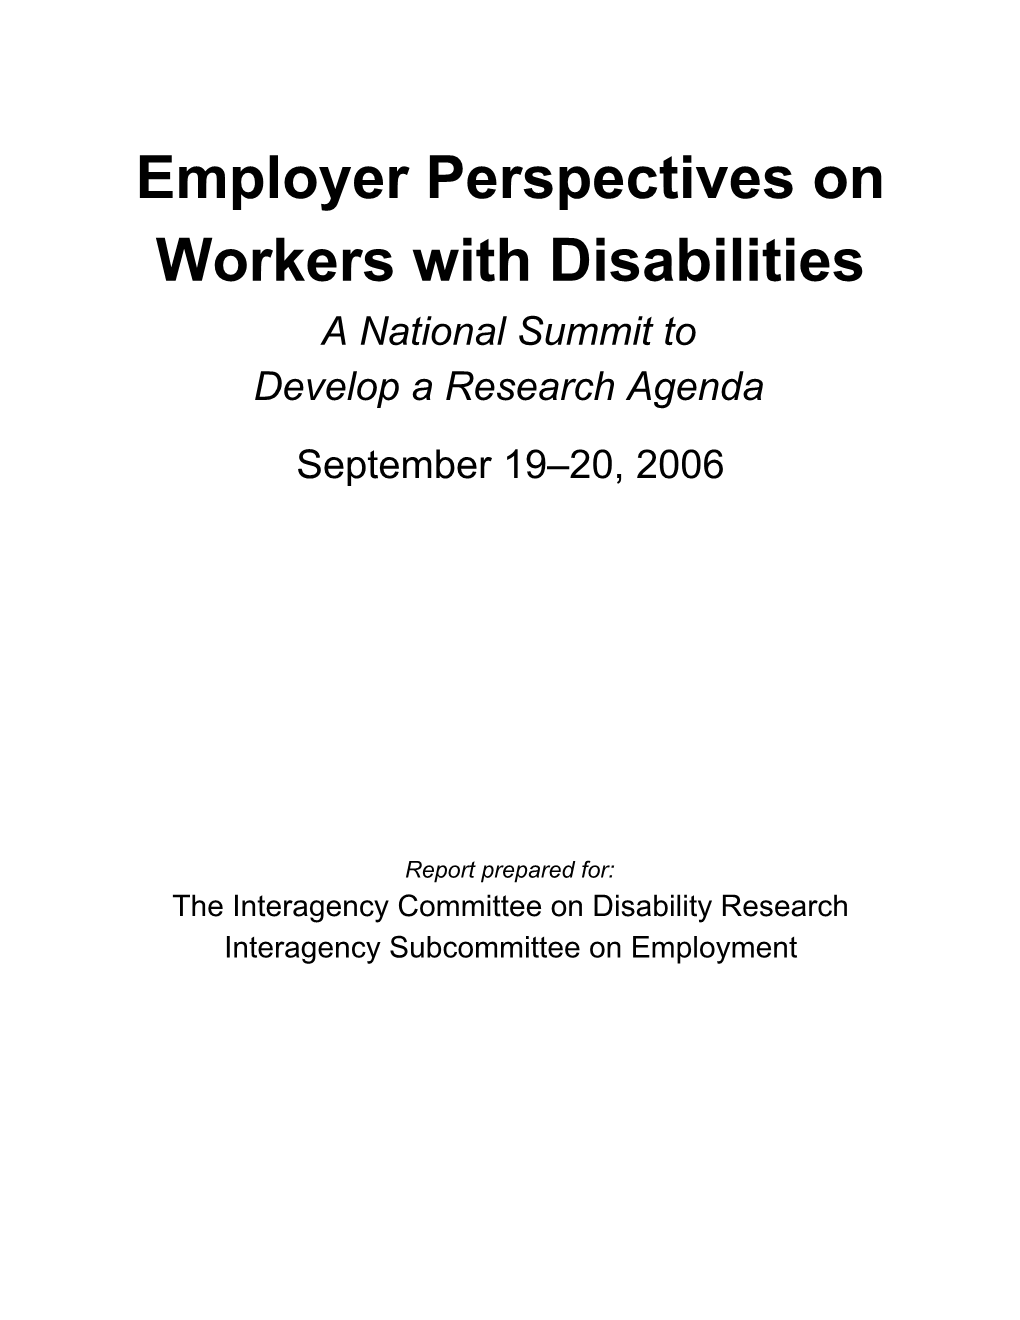 Employer Perspectives on Workers with Disabilities a National Summit to Develop a Research